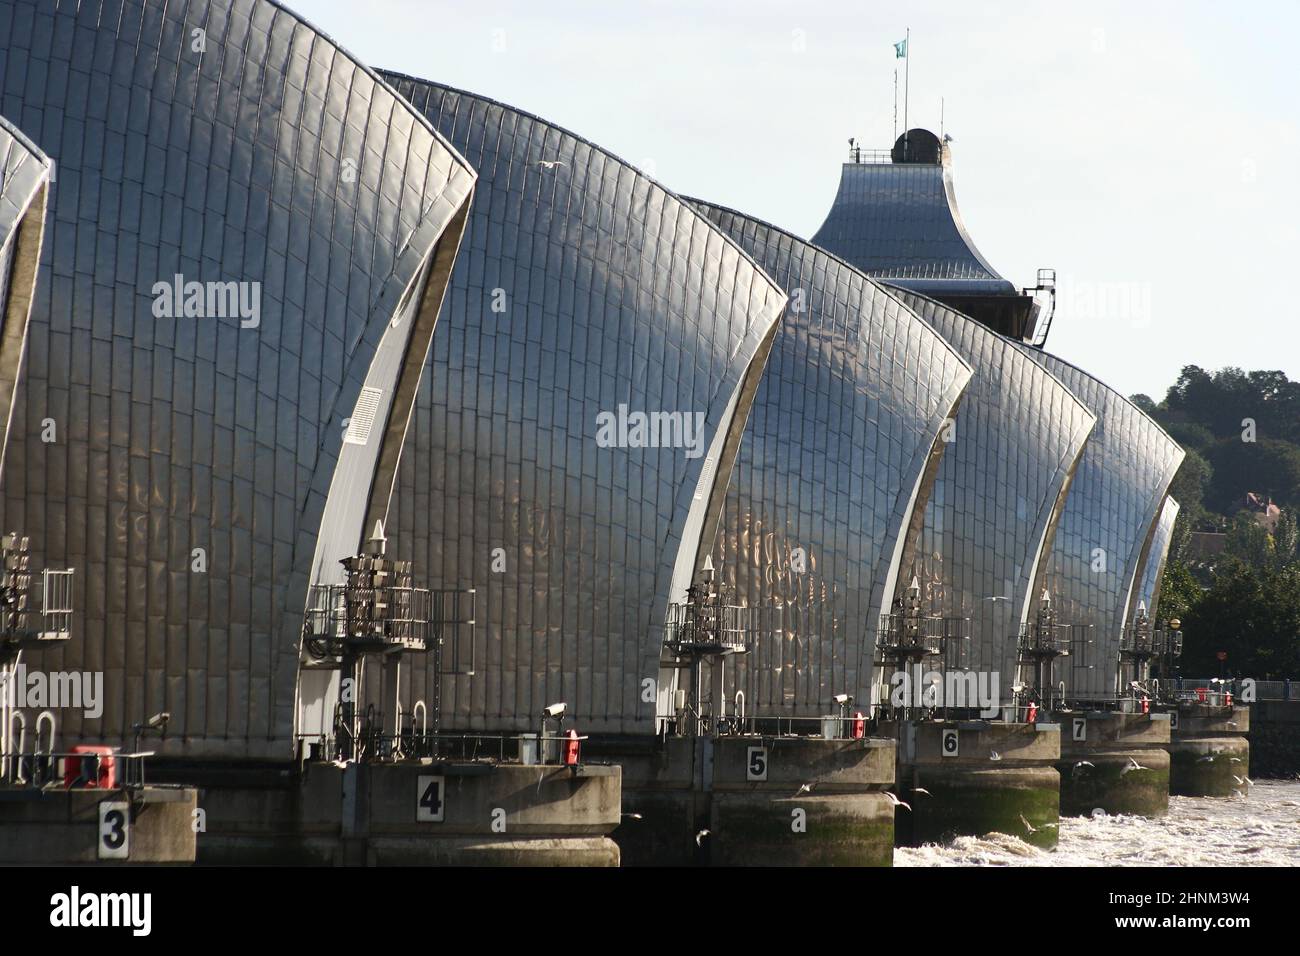 Thames flood barrier showing the symmetry of the piers Stock Photo